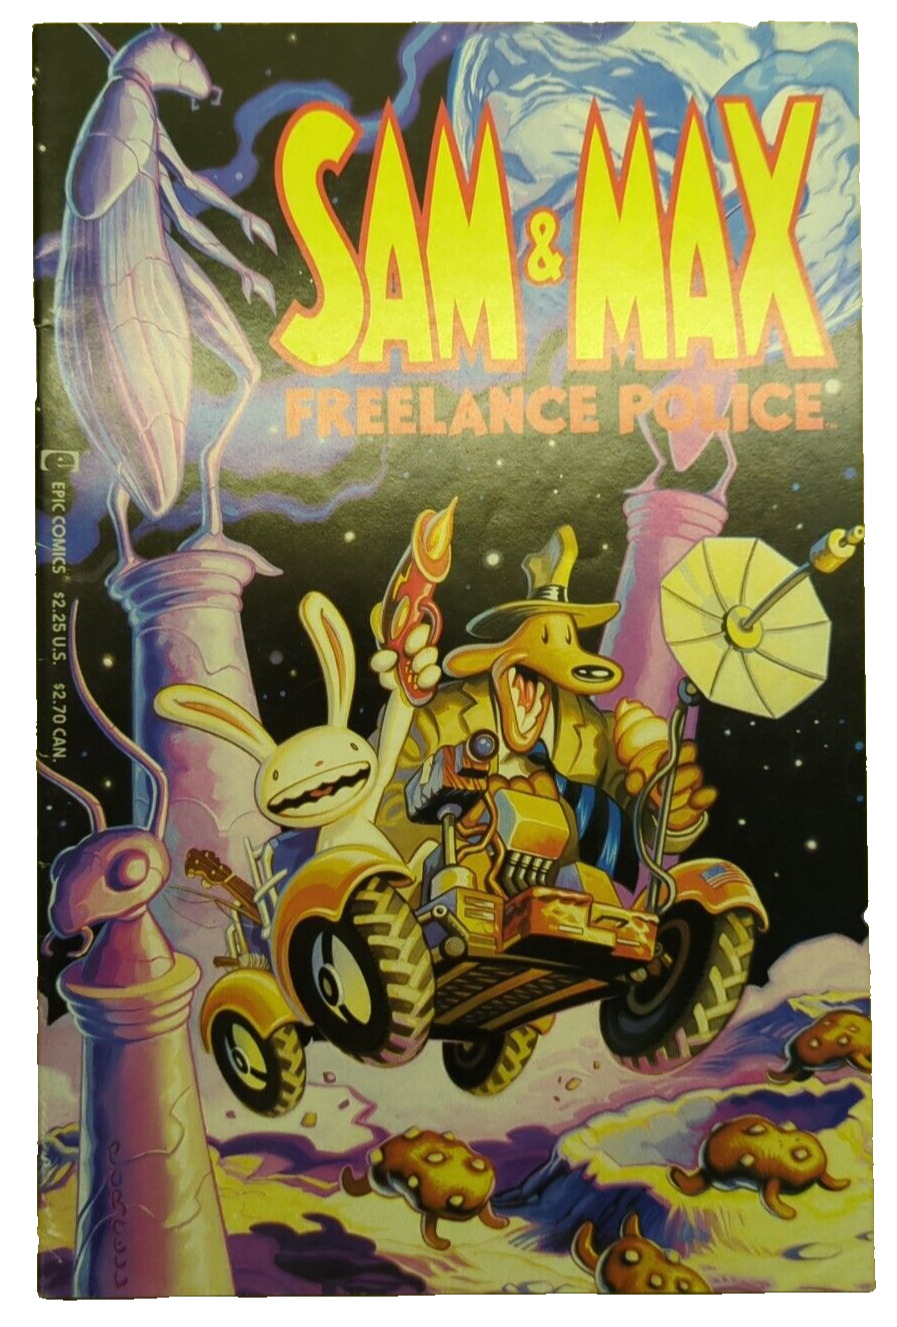 SAM & MAX FREELANCE POLICE #1 EPIC COMICS 1992 STEVE PURCELL Hit the Road